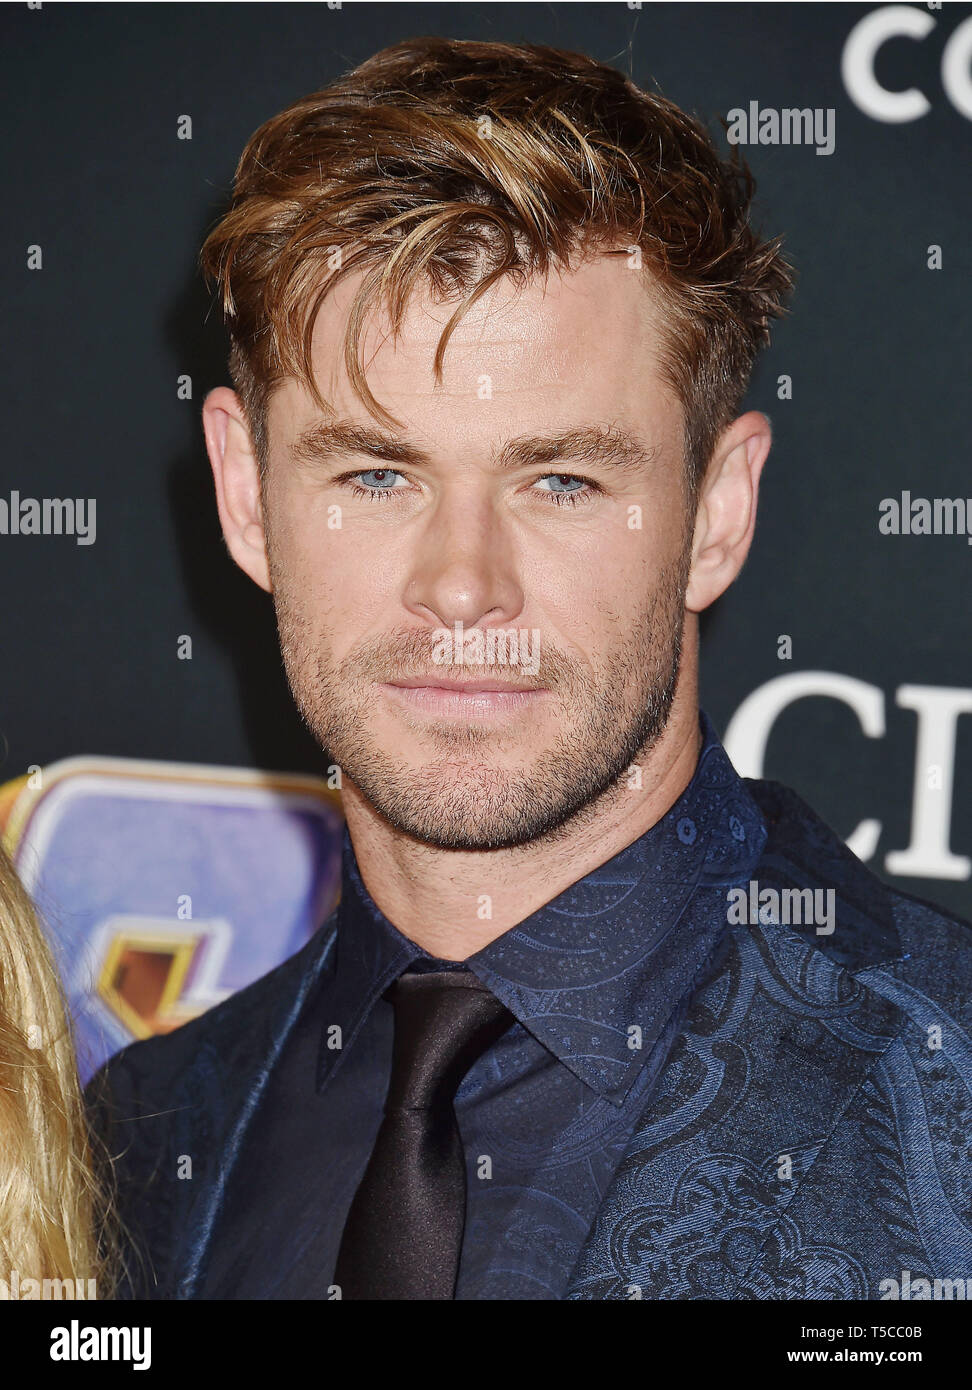 LOS ANGELES, CA - APRIL 22: Chris Hemsworth arrives at the world premiere Of Walt Disney Studios Motion Pictures 'Avengers: Endgame' at the Los Angeles Convention Center on April 22, 2019 in Los Angeles, California. Stock Photo